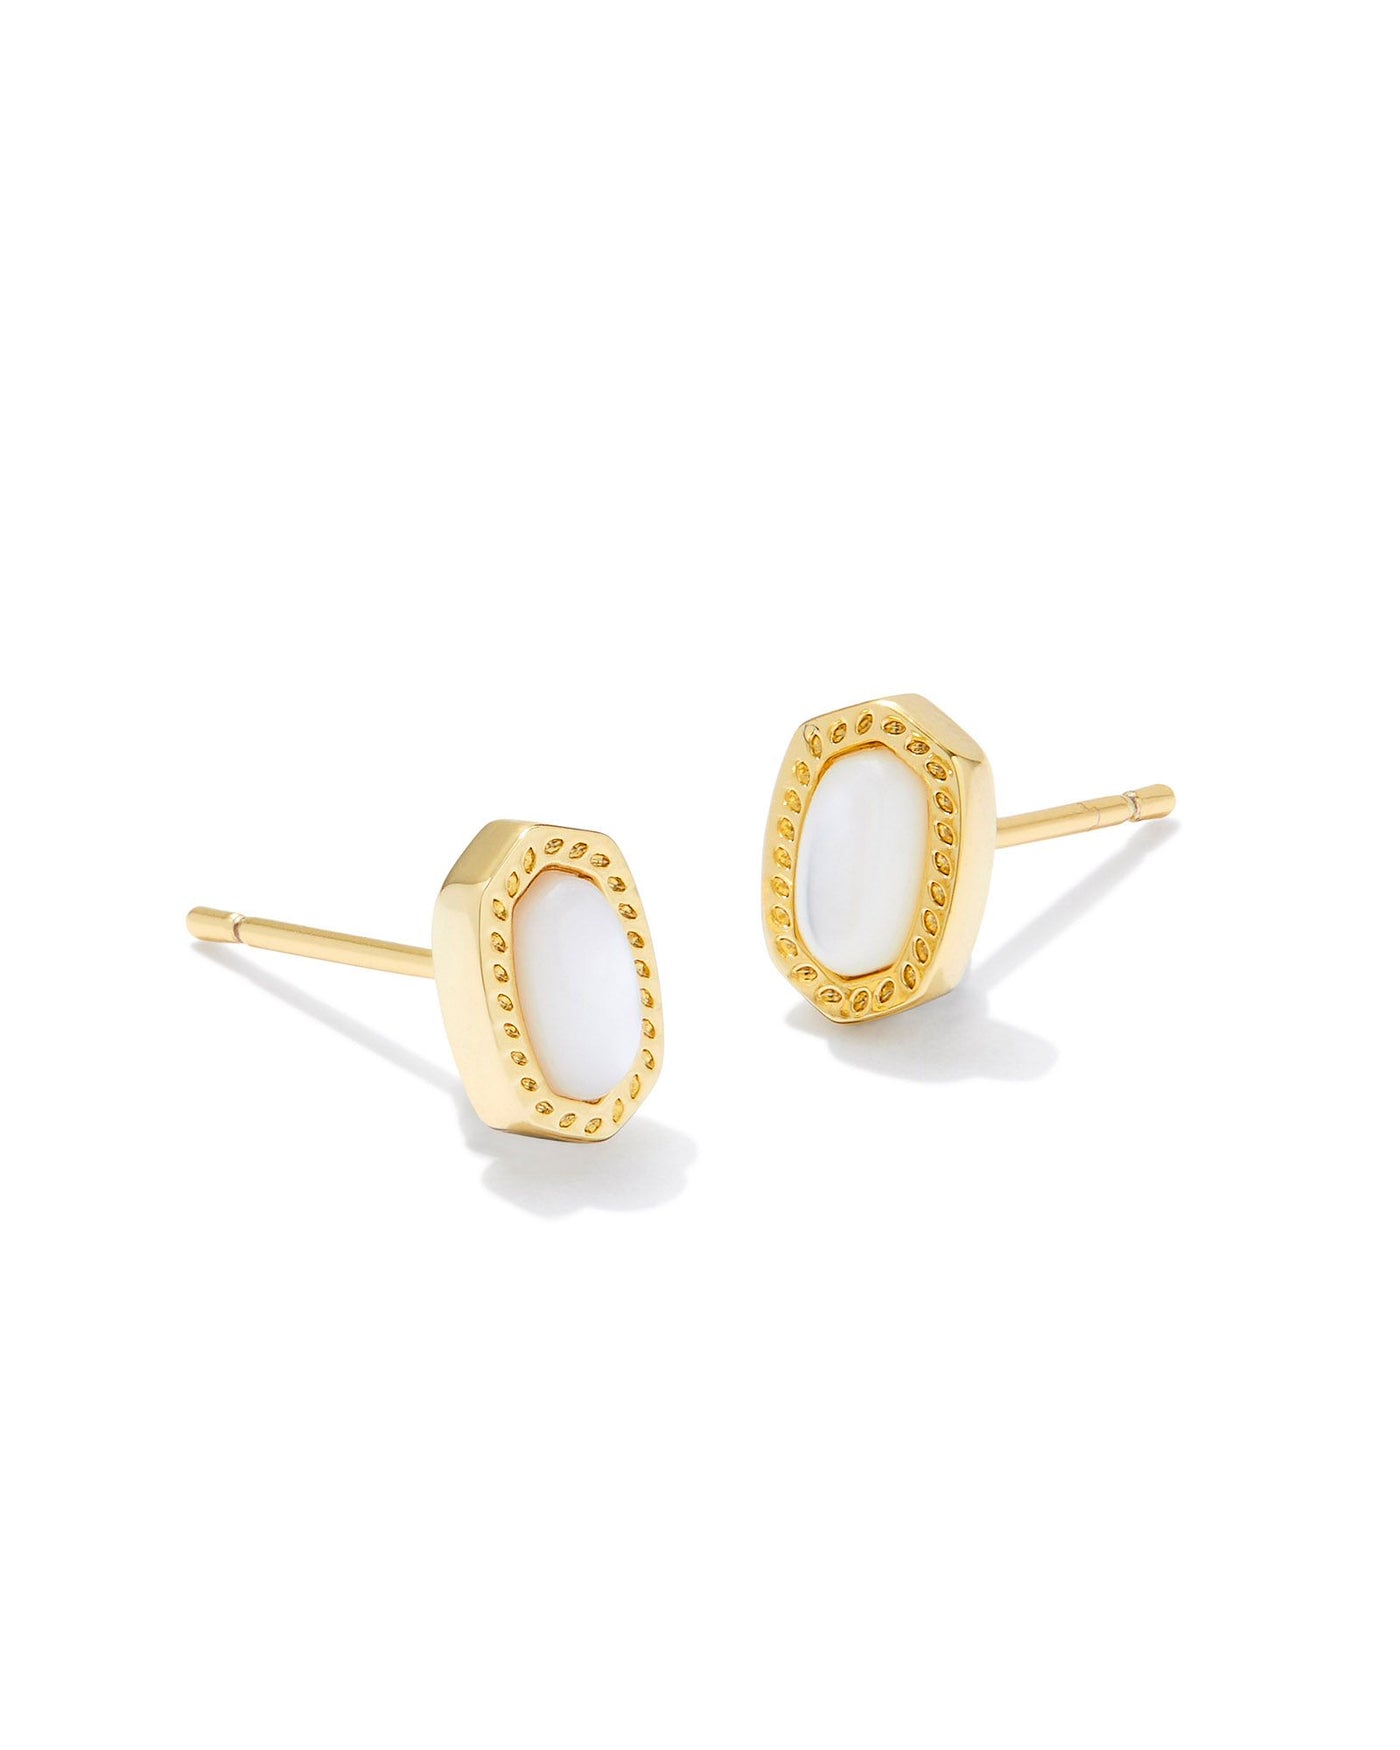 Kendra Scott Mini Ellie Stud Earrings-Earrings-Kendra Scott-Market Street Nest, Fashionable Clothing, Shoes and Home Décor Located in Mabank, TX